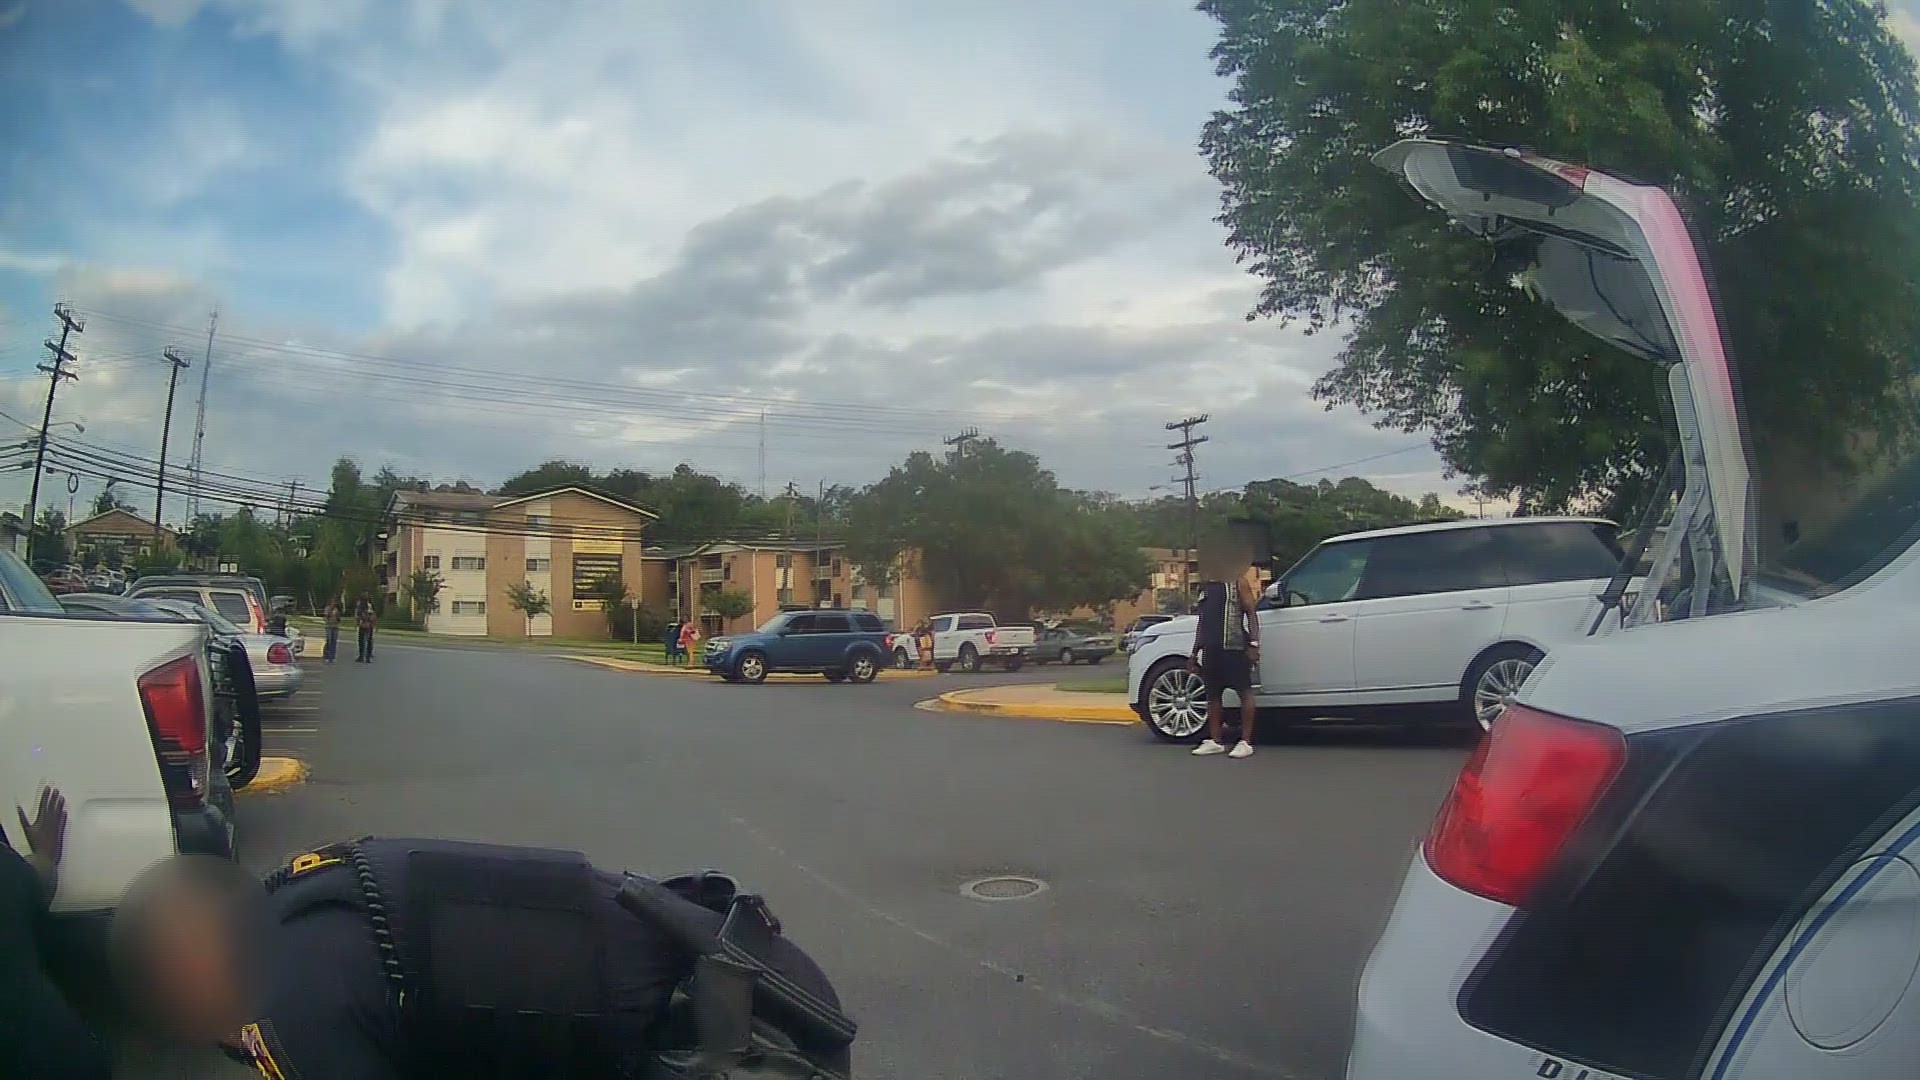 Body worn camera video shows former New Carrollton Sgt. Jeffery Harris place a suspect into a cruiser upside down. He was later found guilty of assault.